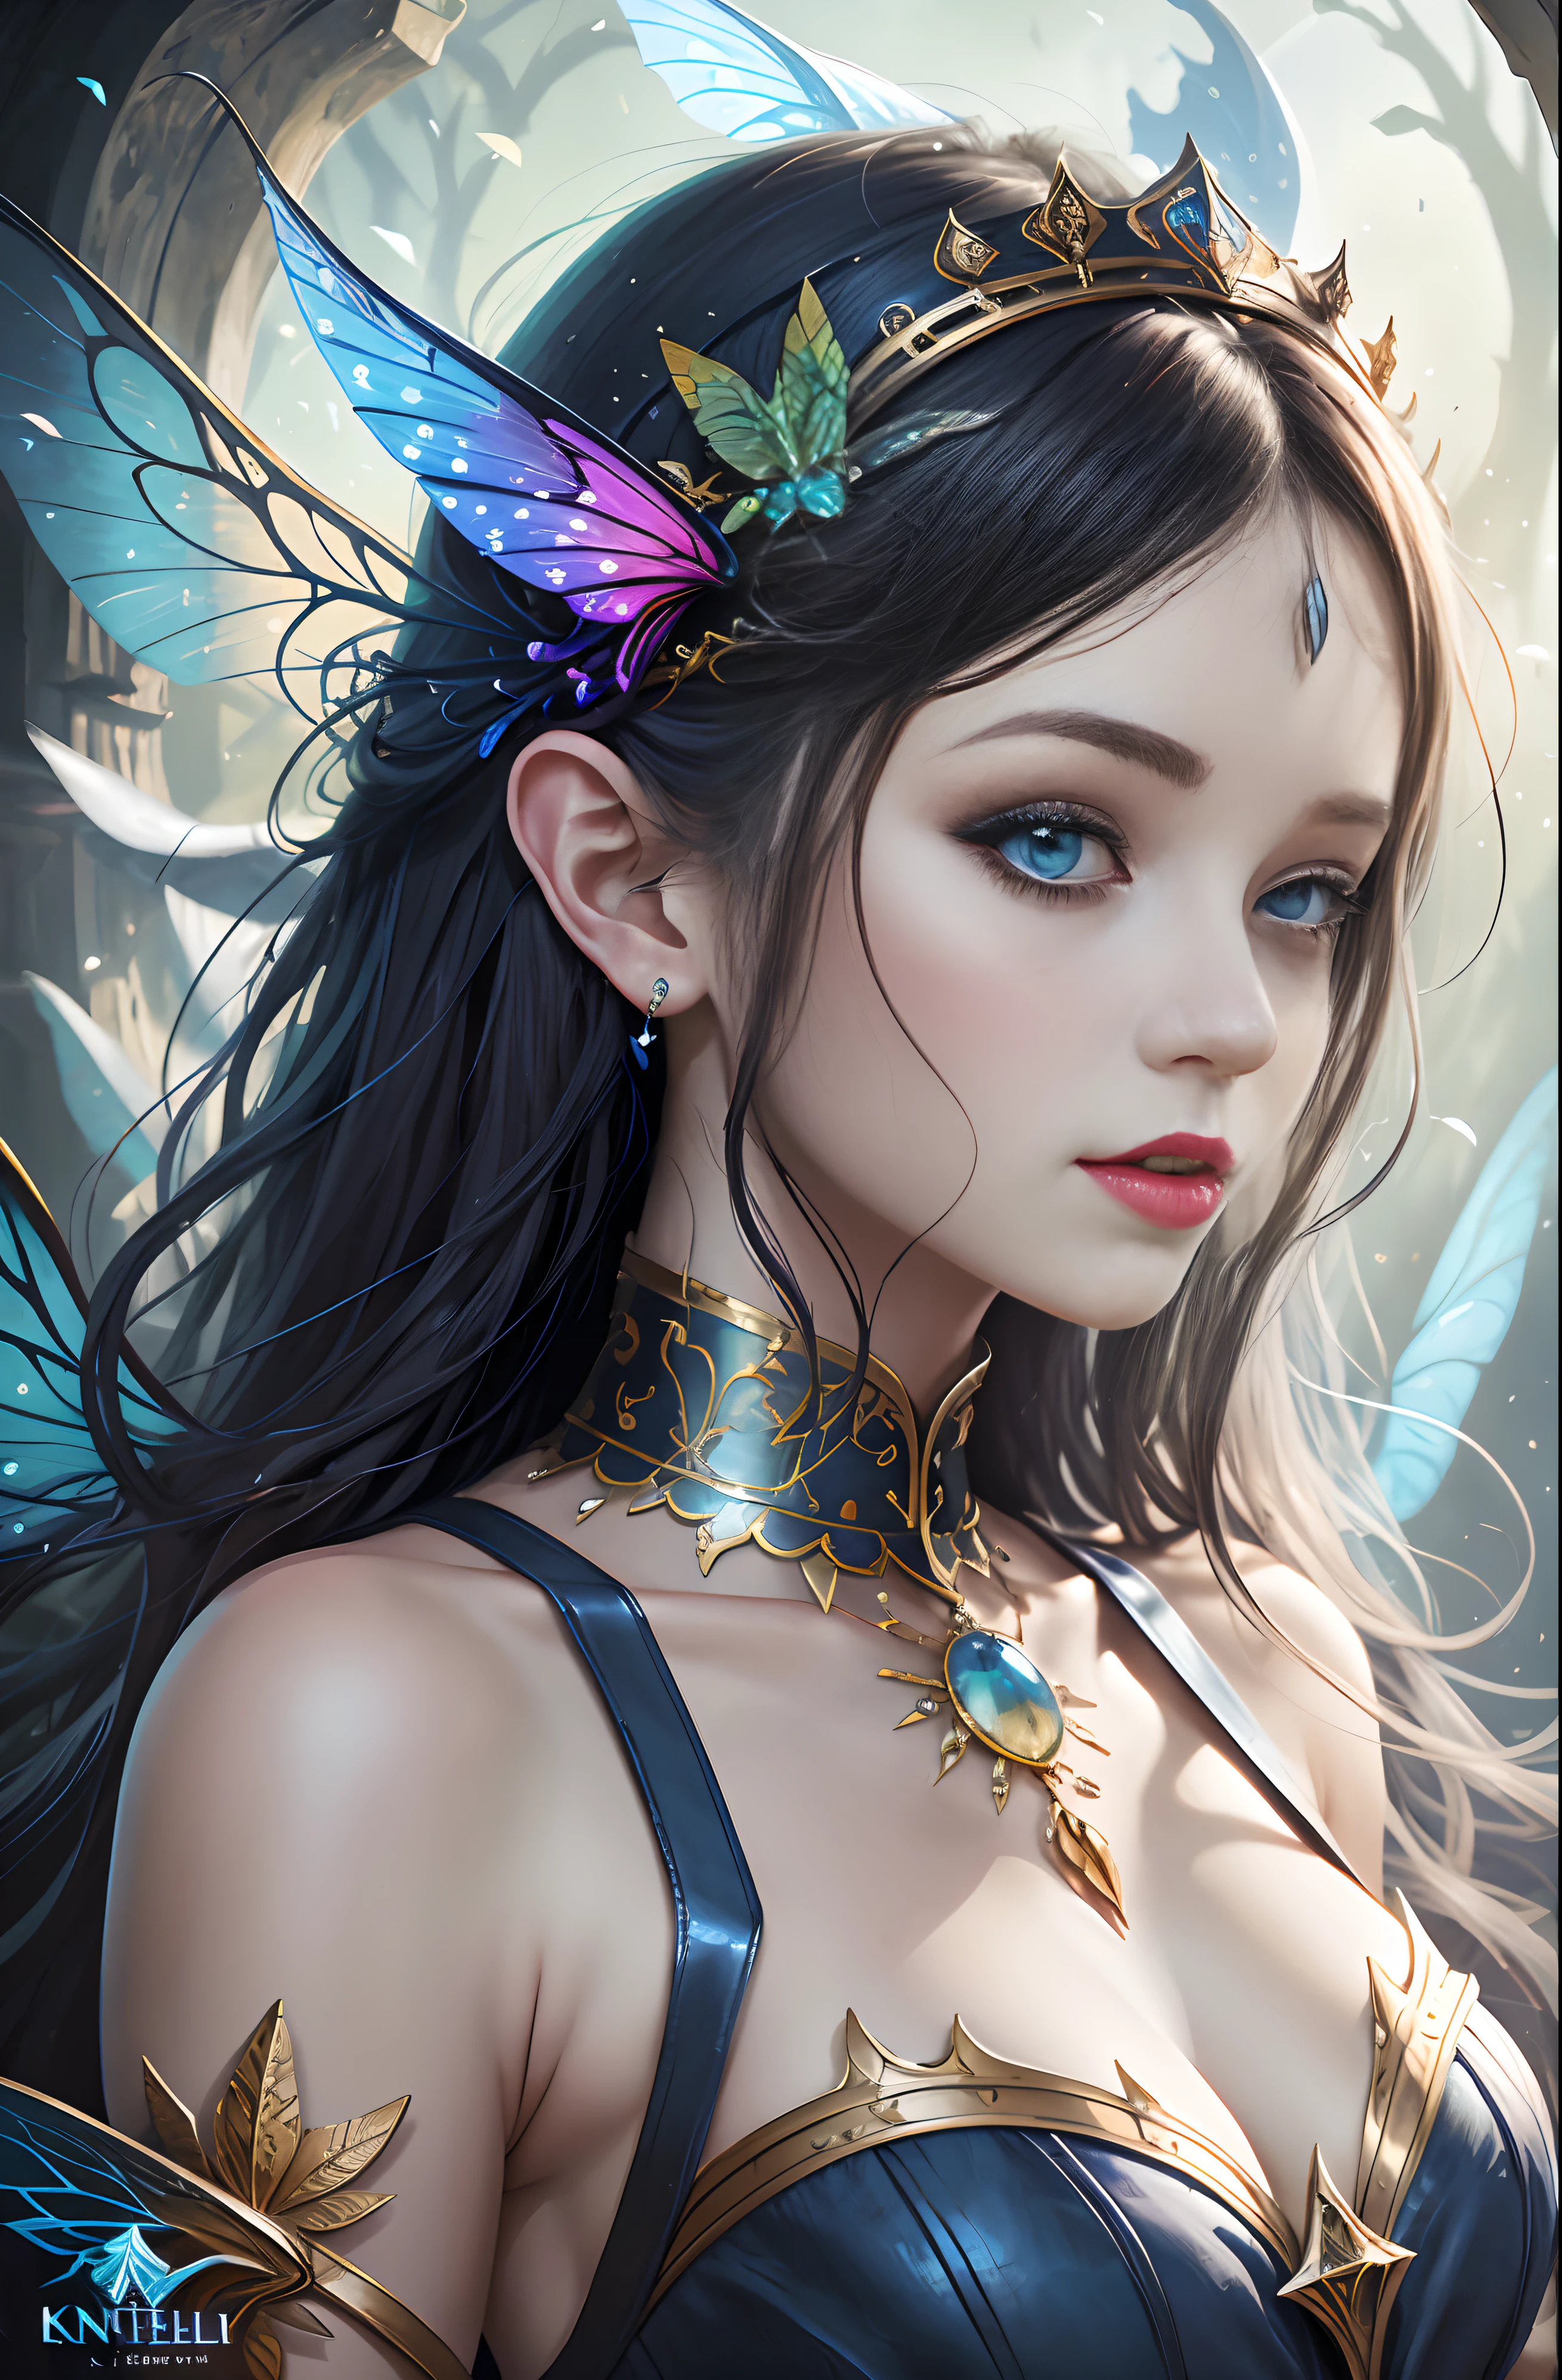 There is a woman with a butterfly headdress and a crown, digital fantasy art ), beautiful fantasy art portrait, Beautiful fantasy art, fantasy art style, detailed fantasy digital art, beautiful fantasy portrait, fantasy art portrait, Fantasy Art Behance, beautiful digital artwork, stunning digital illustration, Digital Art Fantasy Art, Art in Fantasy Style, detailed fantasy art, very beautiful fantasy art